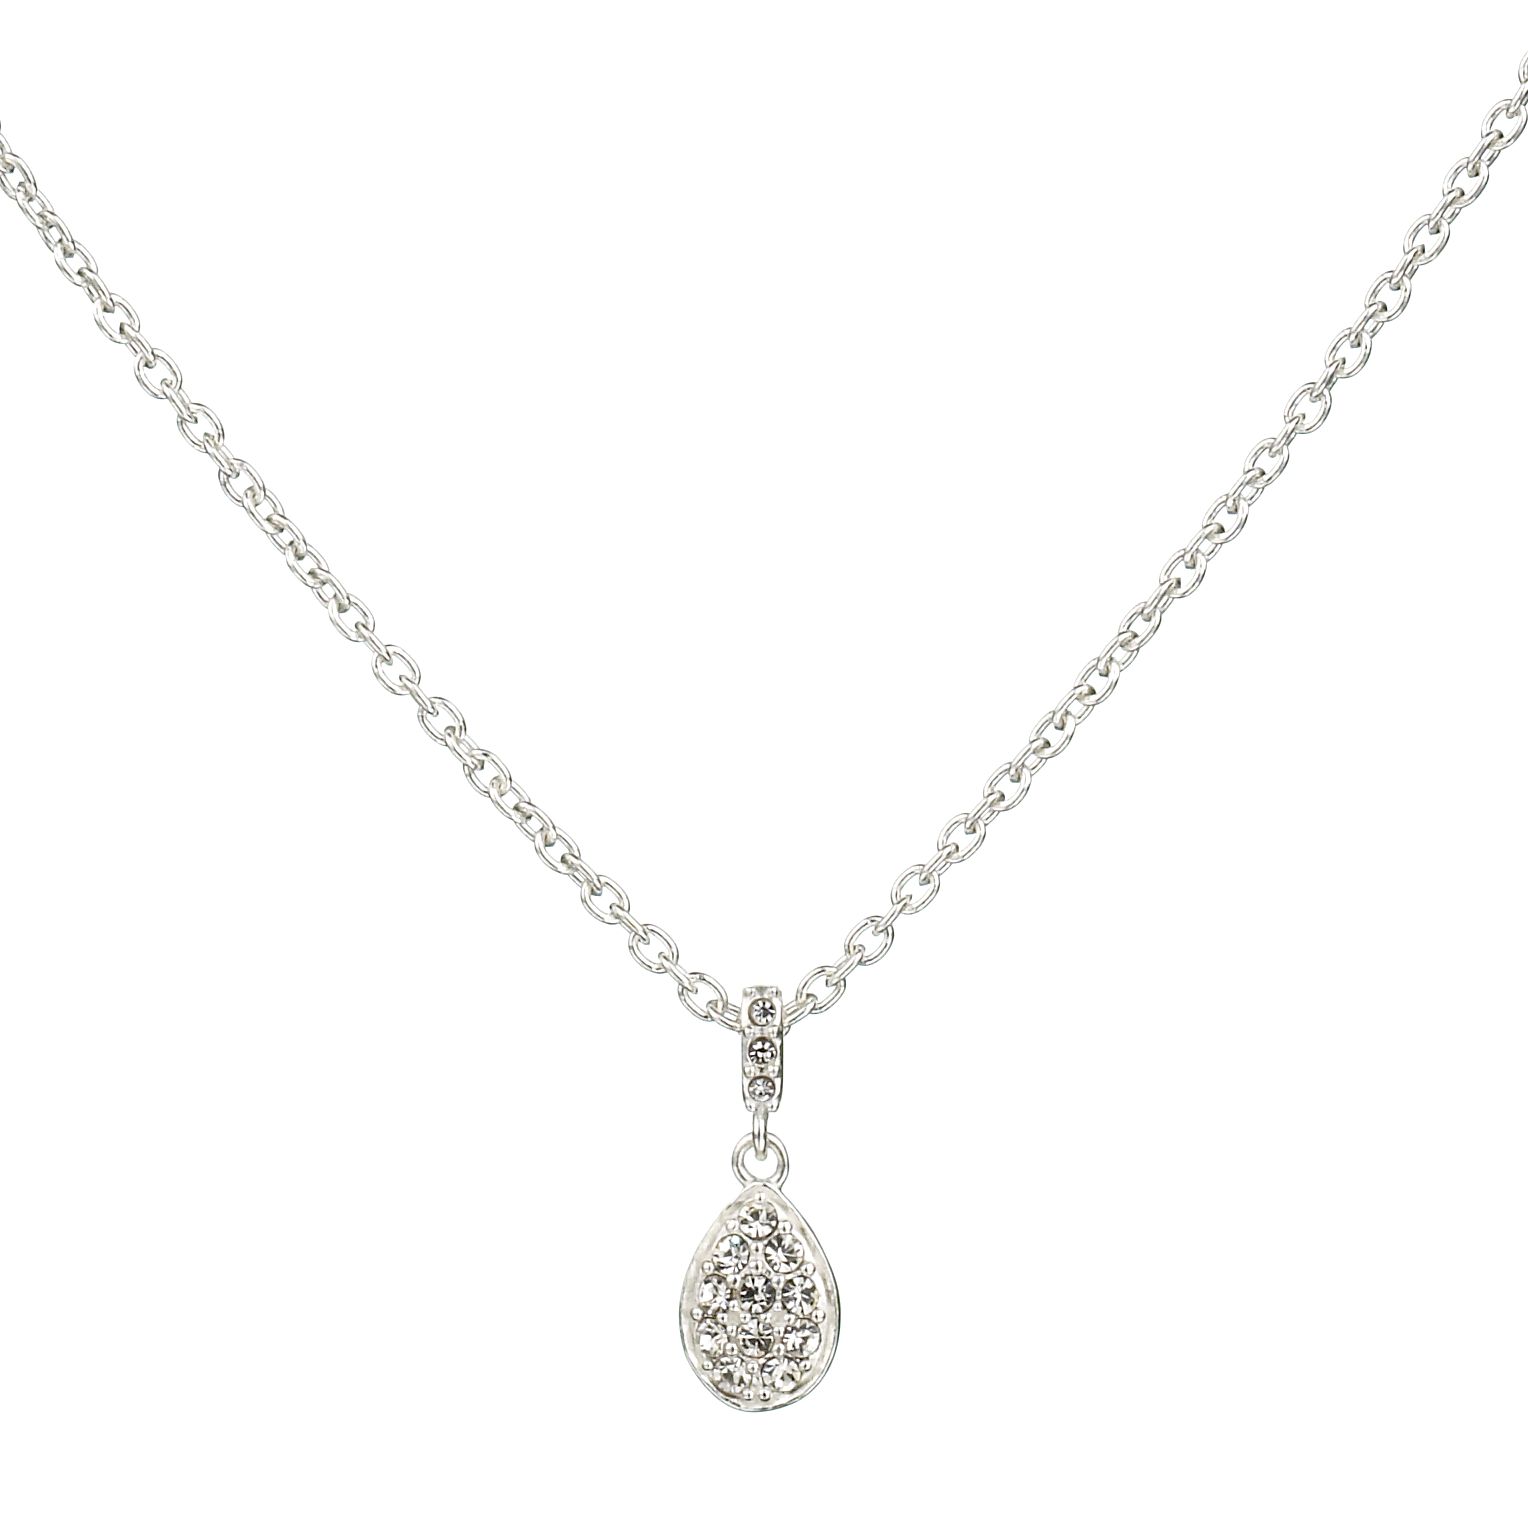 John Lewis Pave Pear Sterling Silver Necklace